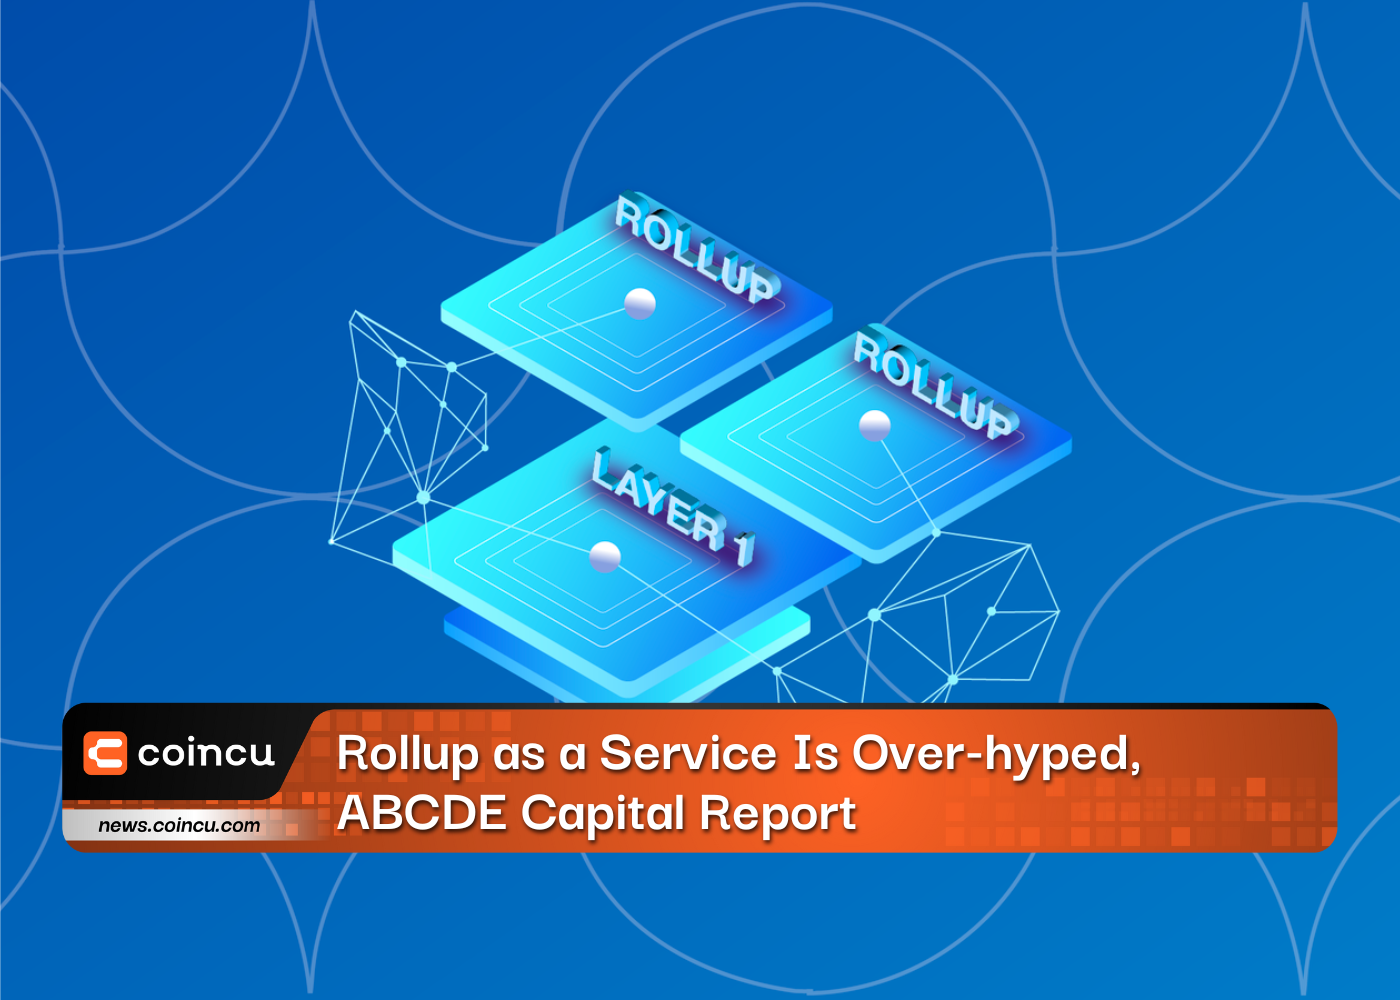 Rollup as a Service Is Over-hyped, ABCDE Capital Report